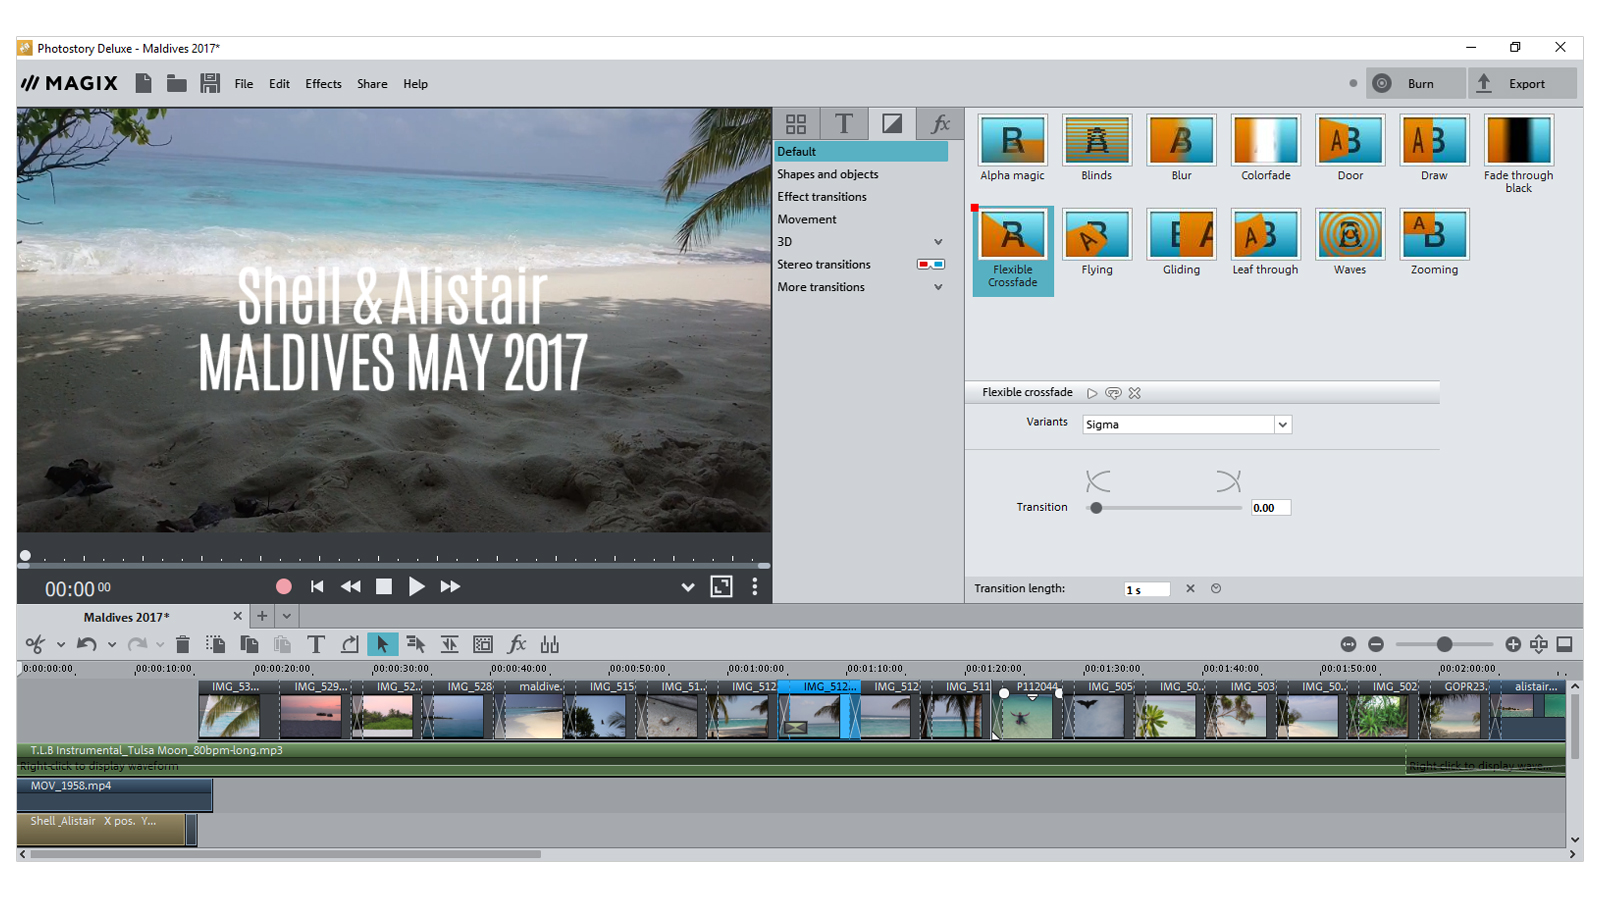 Magix Photostory Deluxe Timeline Editing View